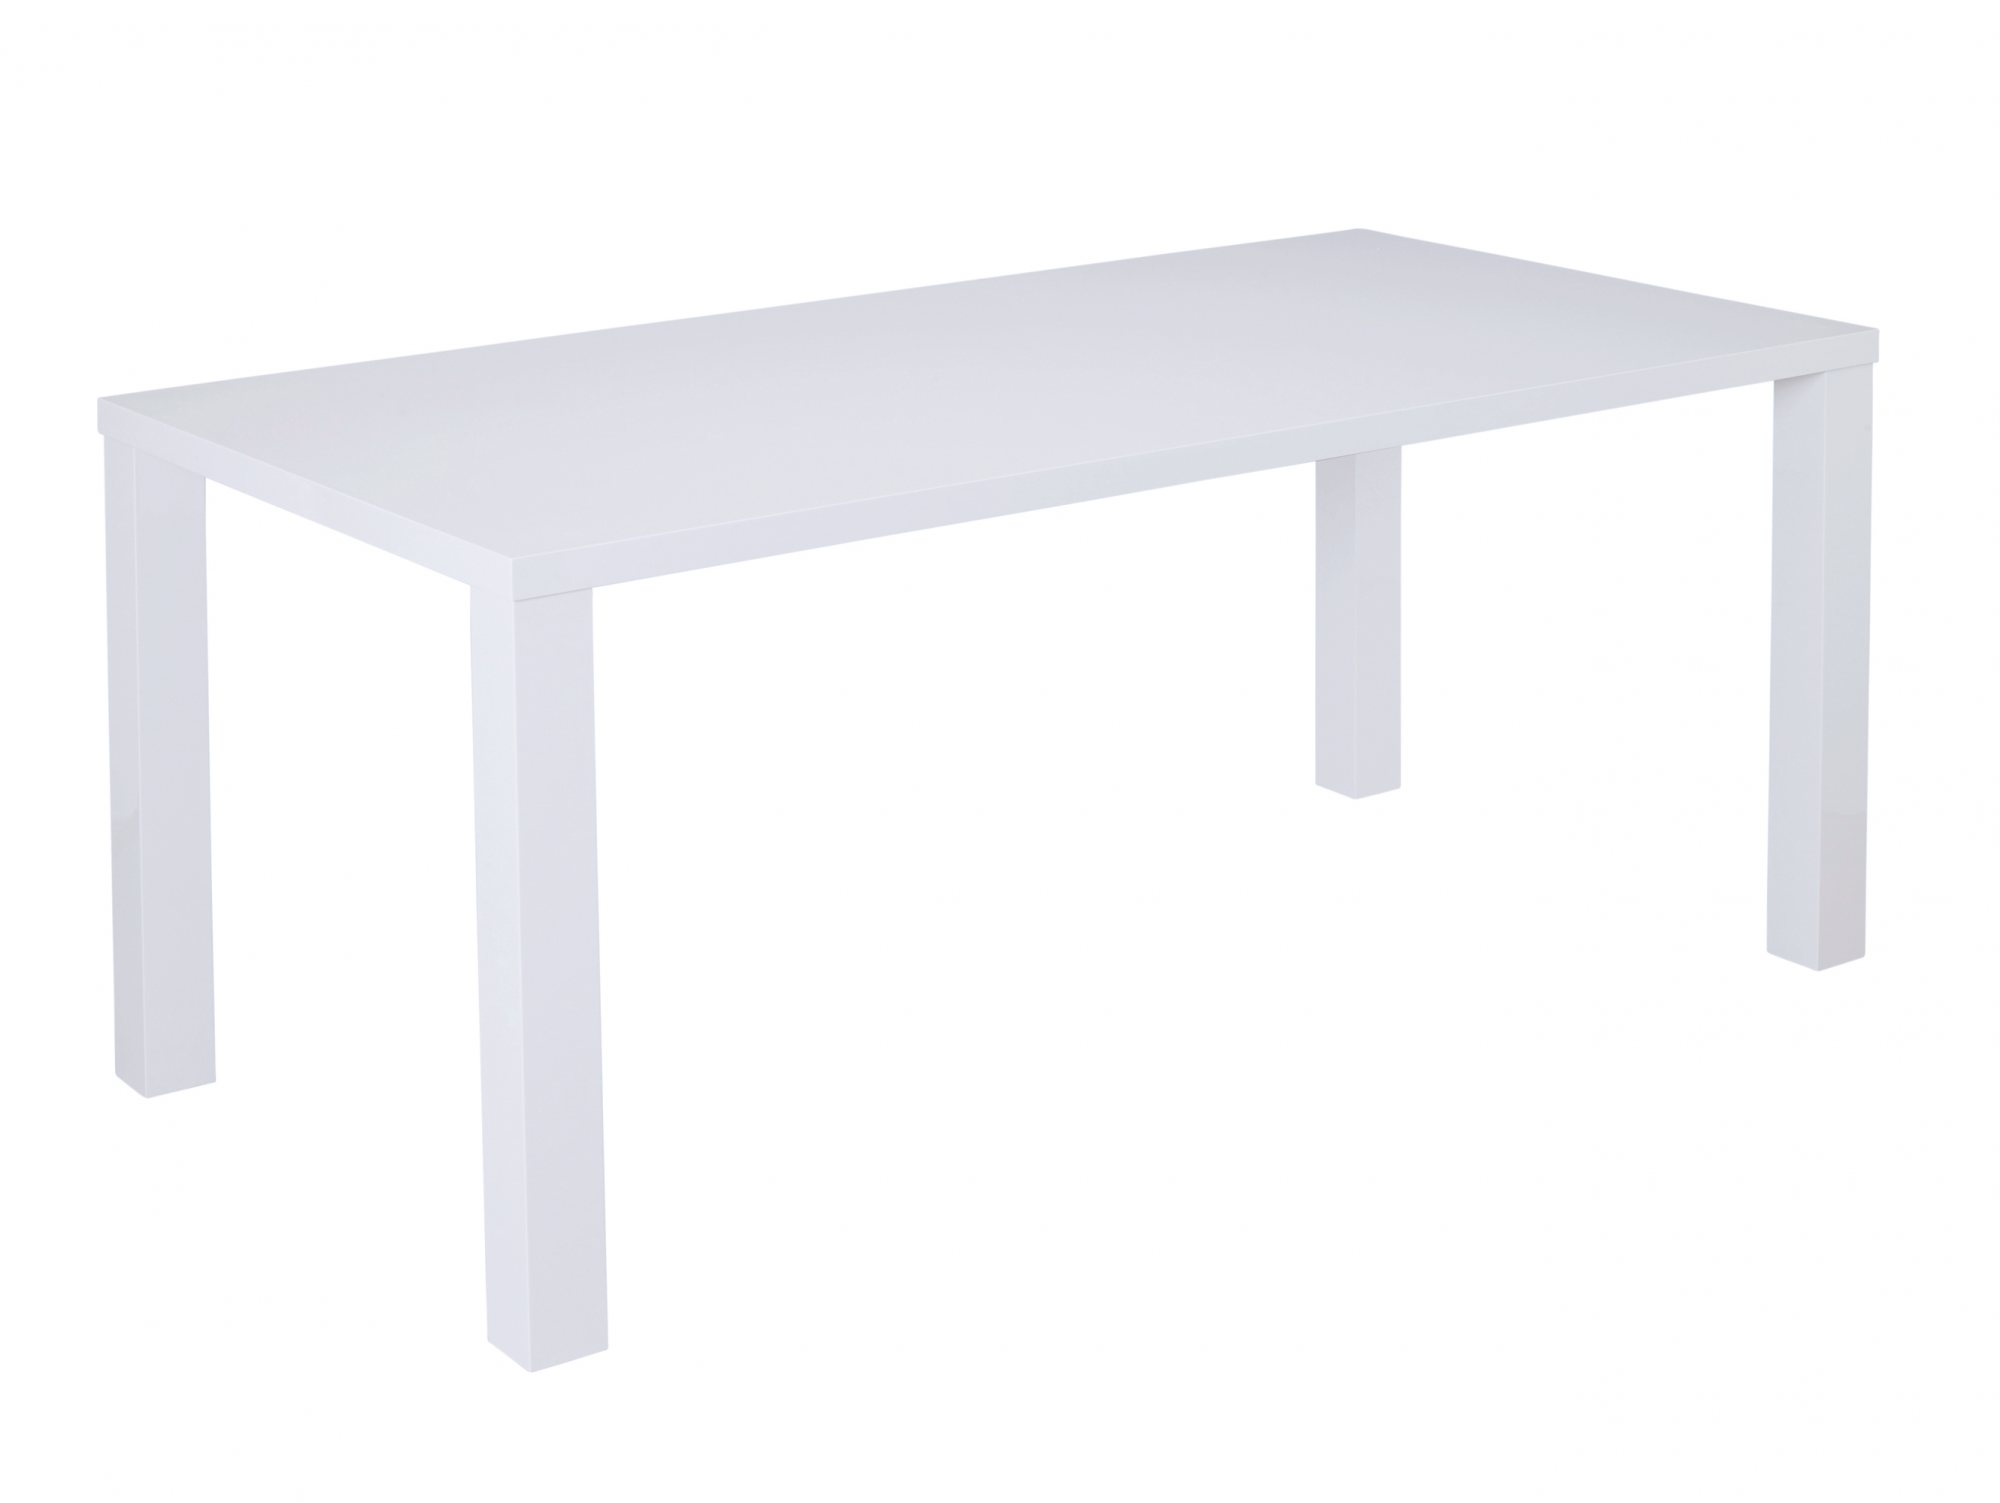 LPD LPD Monroe Puro 120cm White High Gloss Dining Table (Flat Packed)